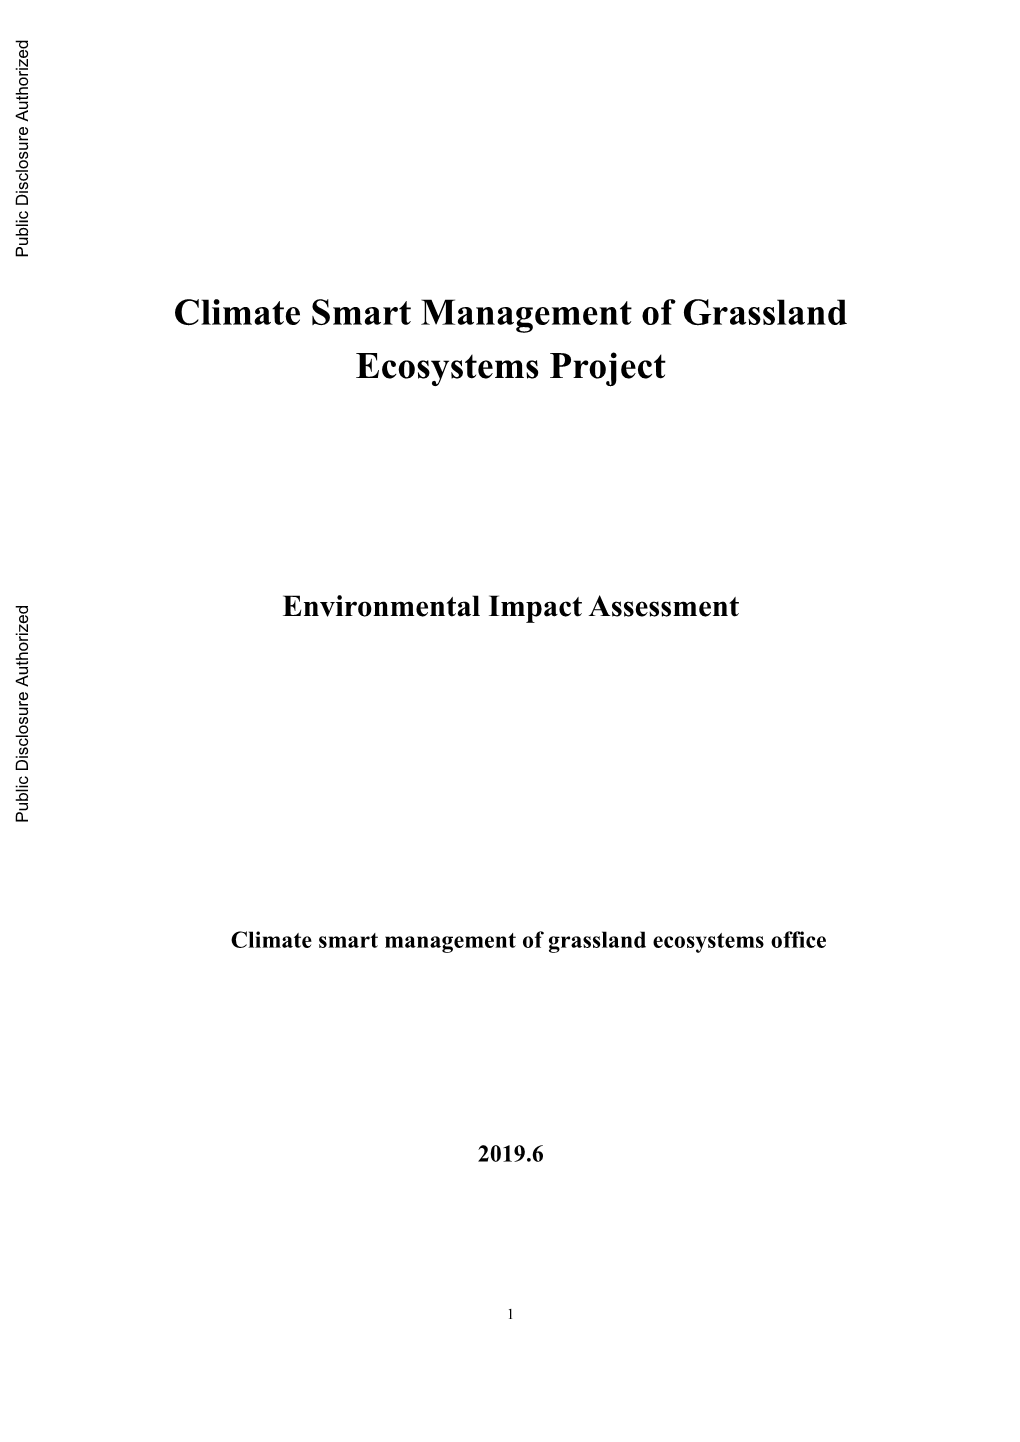 9.2 Potential Environmental Impacts and Mitigation Measures